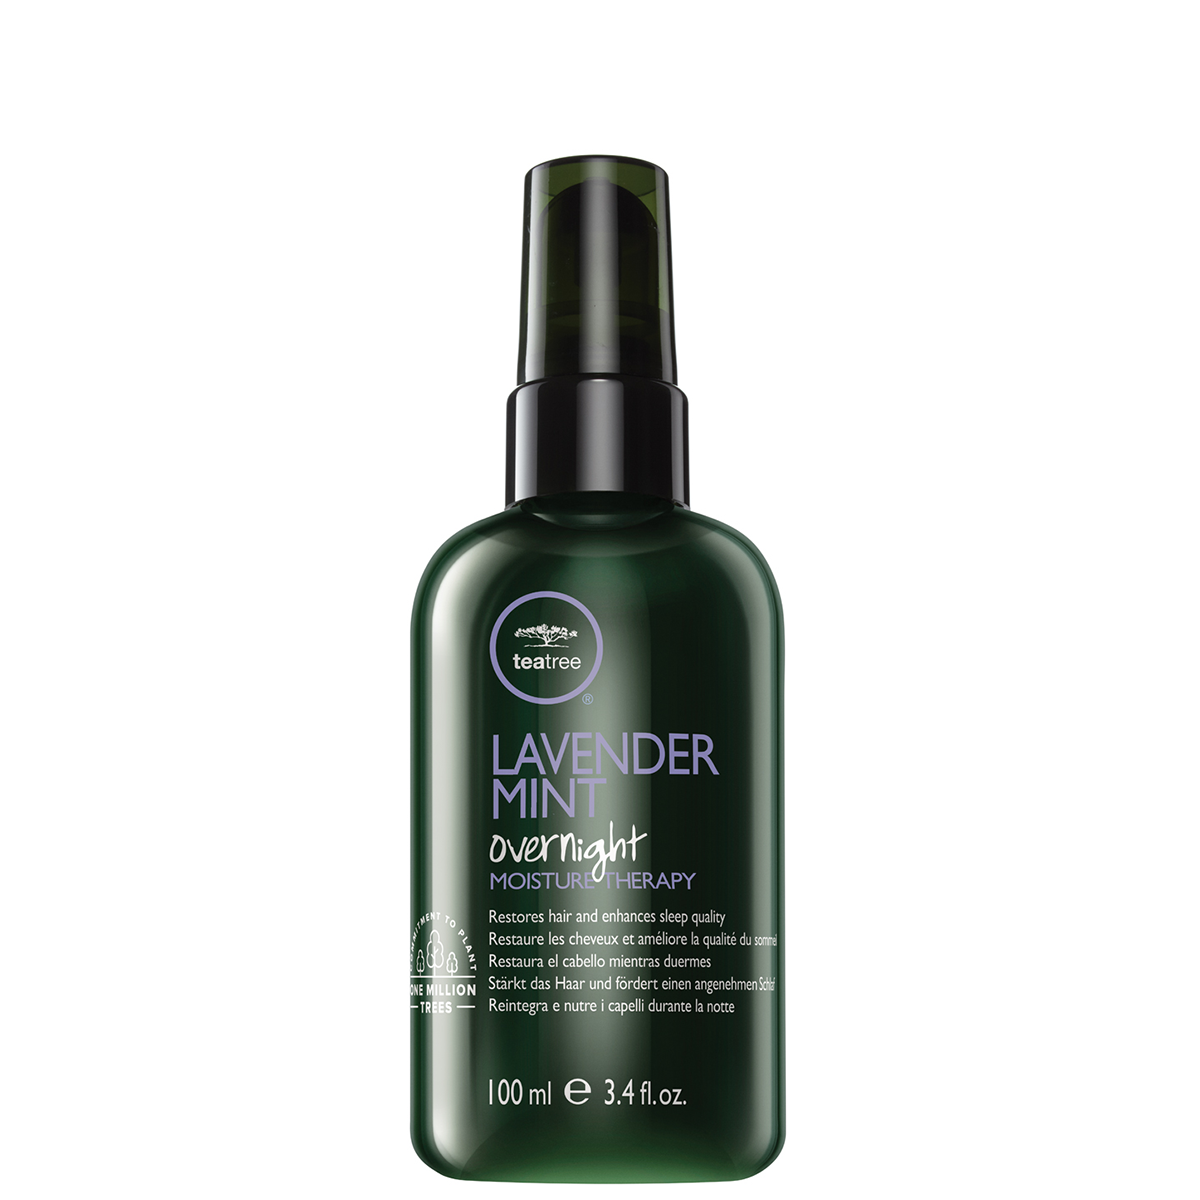 Lavender Mint Overnight Moisture Therapy